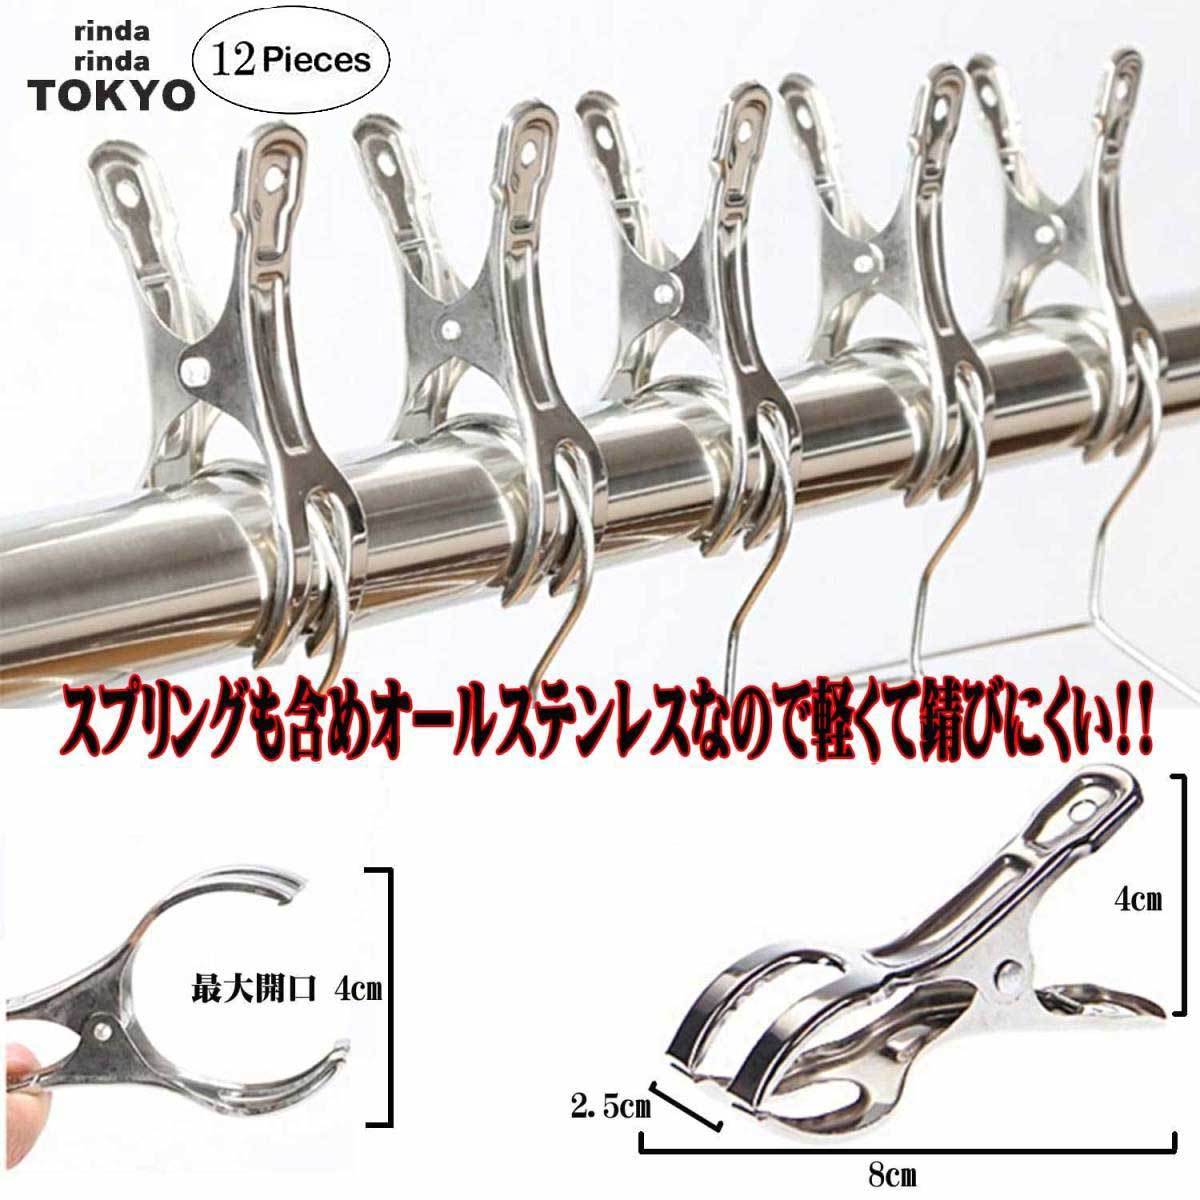  laundry tongs laundry basami laundry clothespin hand work has processed 12 piece set rust . strong stainless steel rod laundry clothespin rod tongs laundry tongs laundry basami